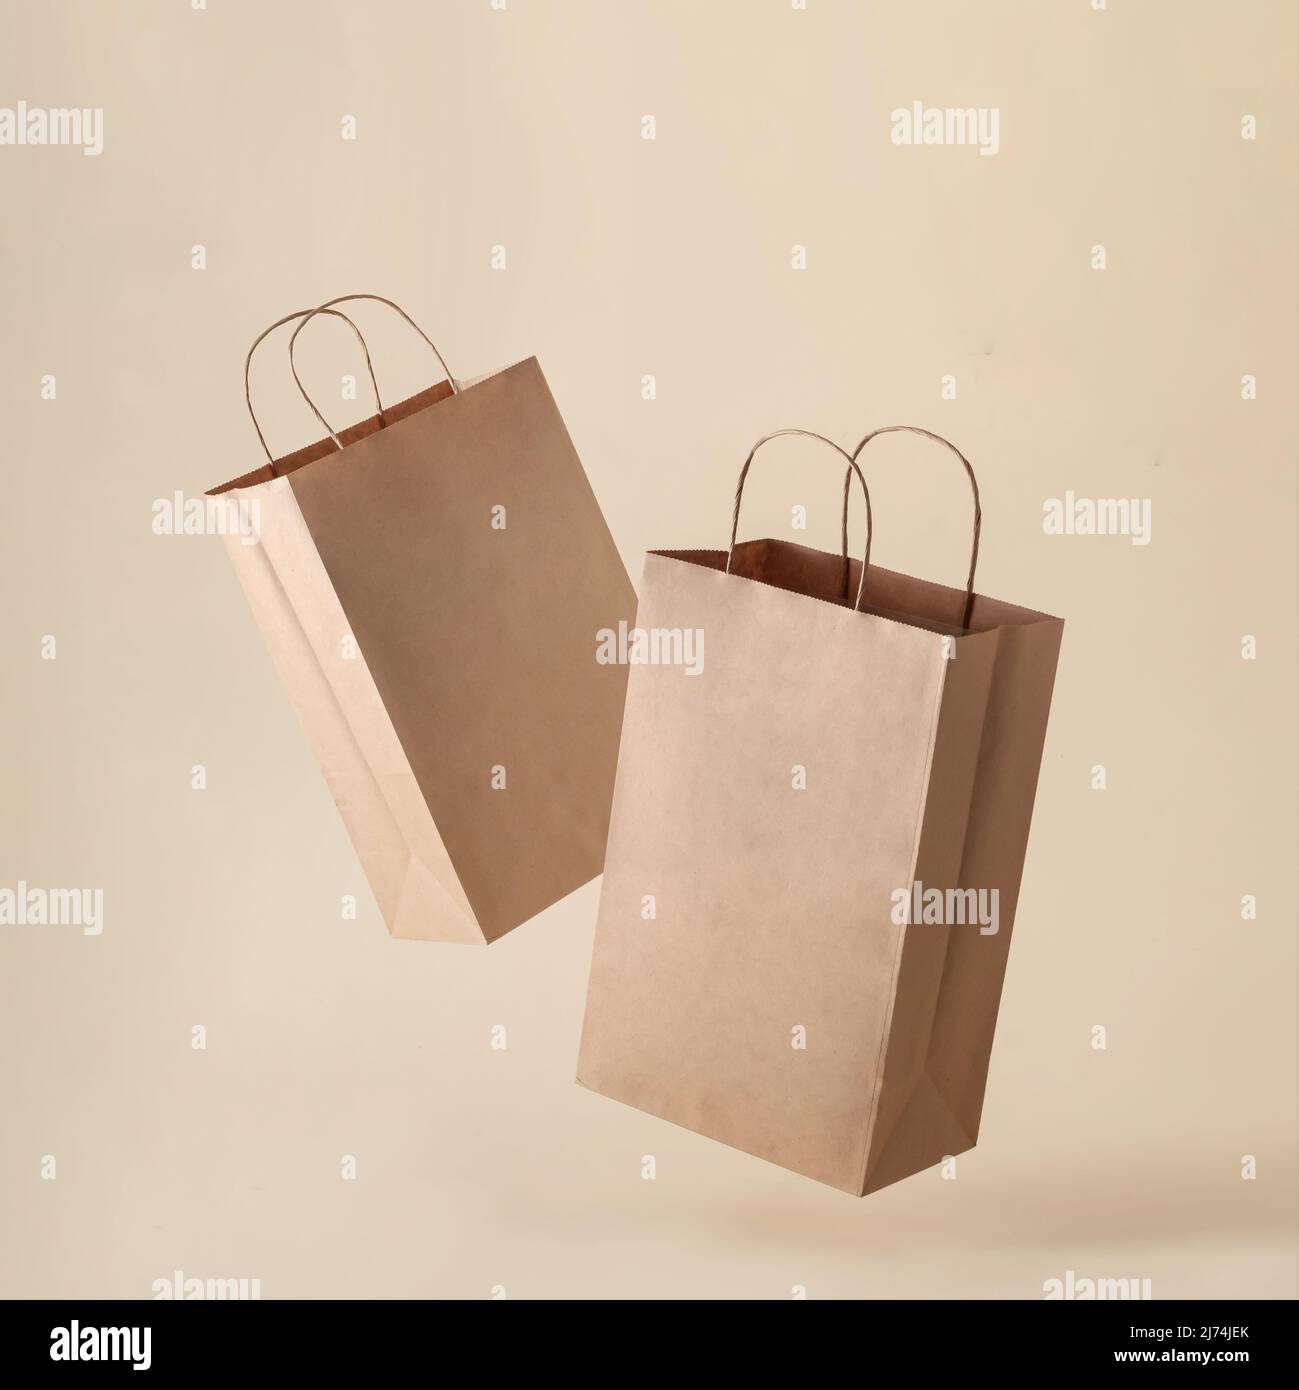 Two paper bags in a container levitation on a clean beige background for shopping in a store and selling food products or marketing as well as for del Stock Photo